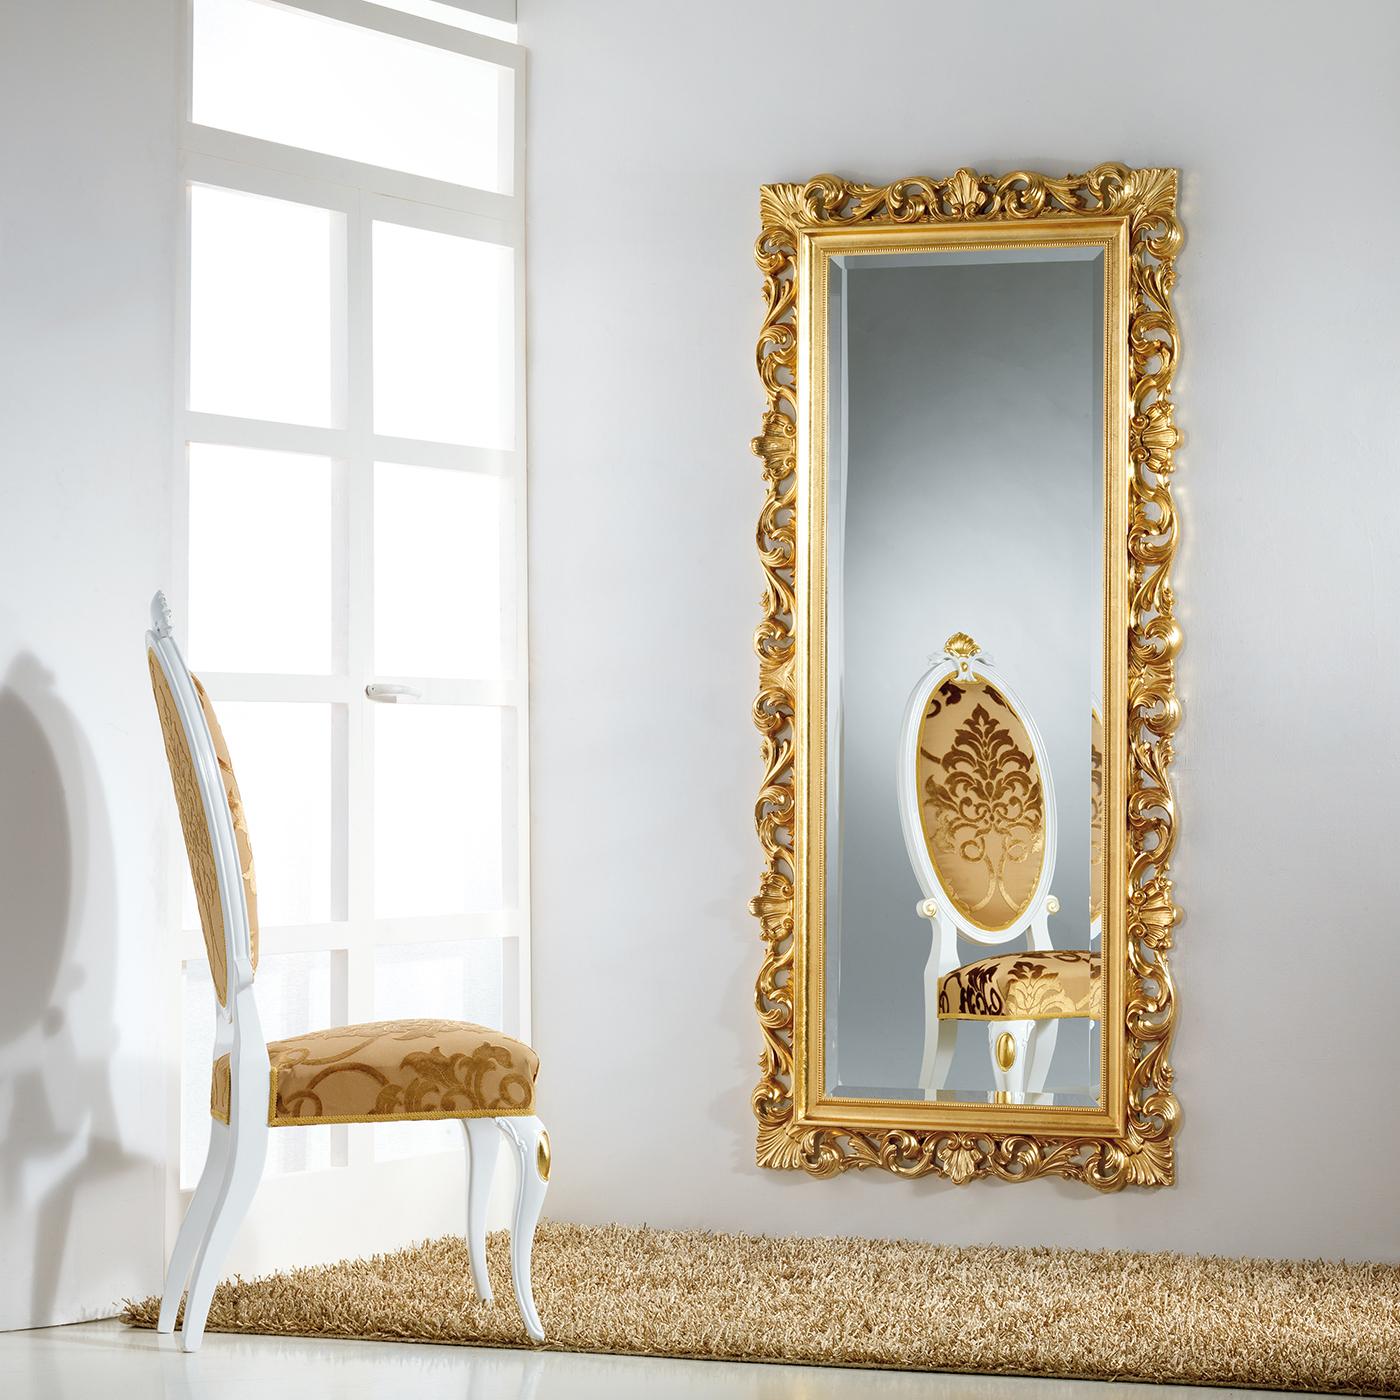 Featuring a rectangular, beveled mirror in prized Italian crystal, this sophisticated wall mirror will be an eye-catching addition to a refined interior. The bold Baroque frame is crafted of wood and adorned by hand with gold leaf, highlighting its